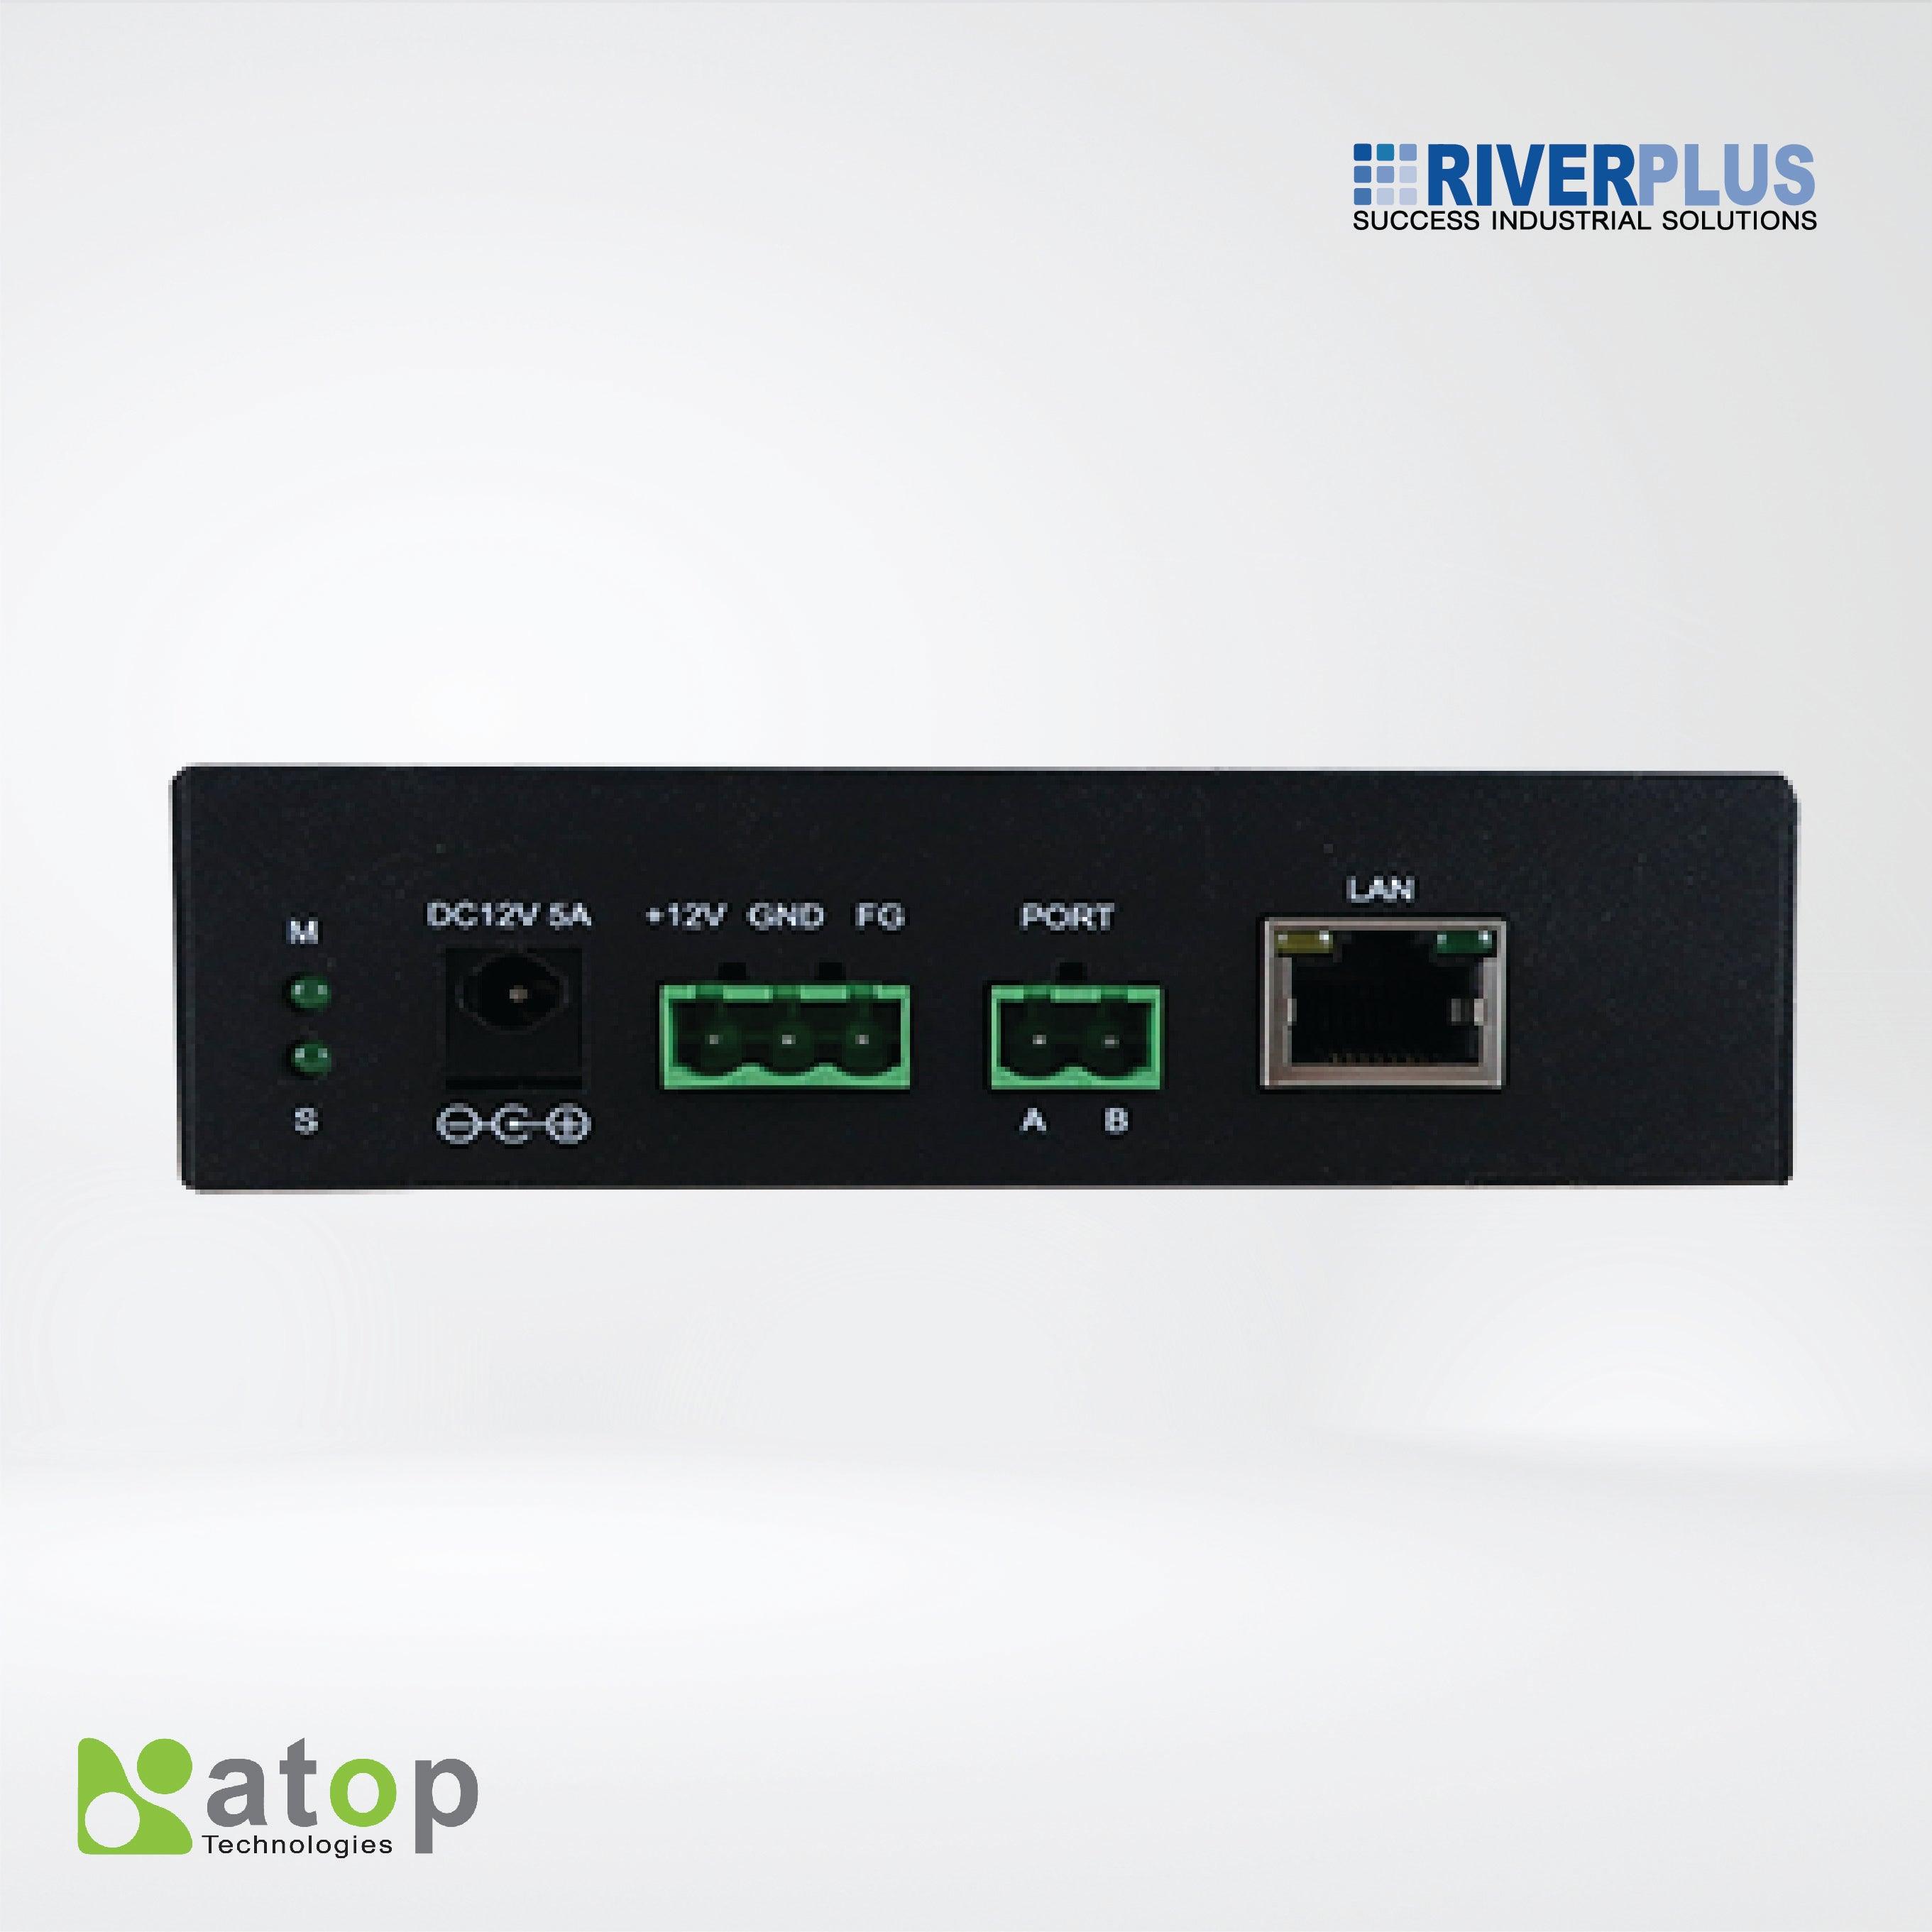 AT400 TCP/IP Controller - Riverplus